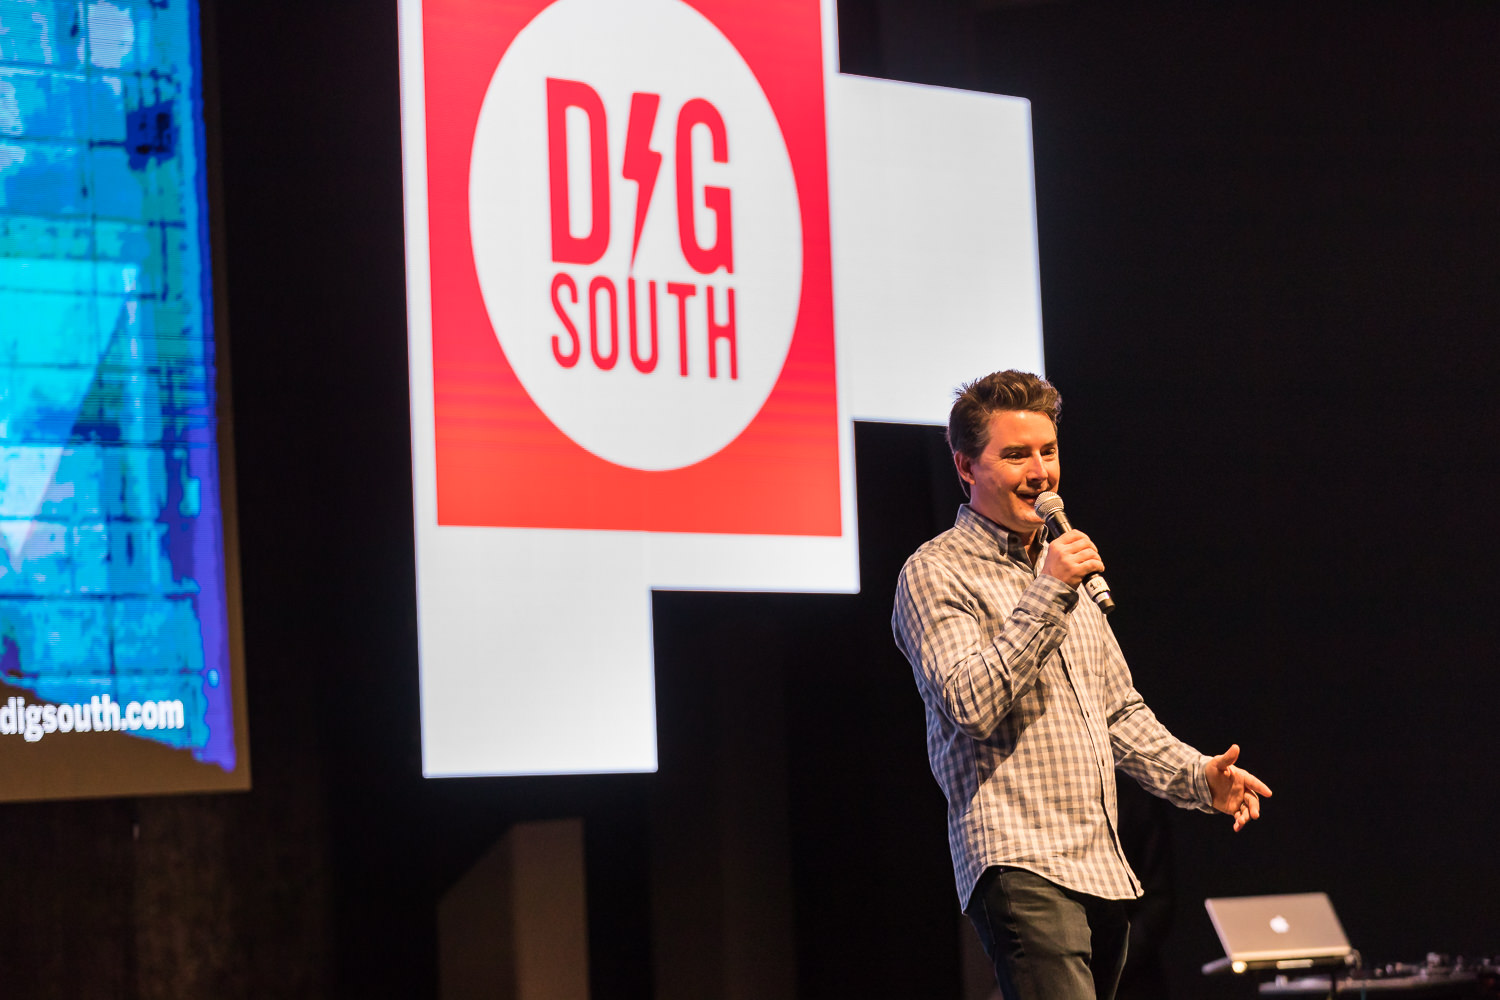 Dig South Founder Stanfield Gray said the tech conference fosters connections between entrepreneurs, founders and investors. (Photo/Adam Chandler)